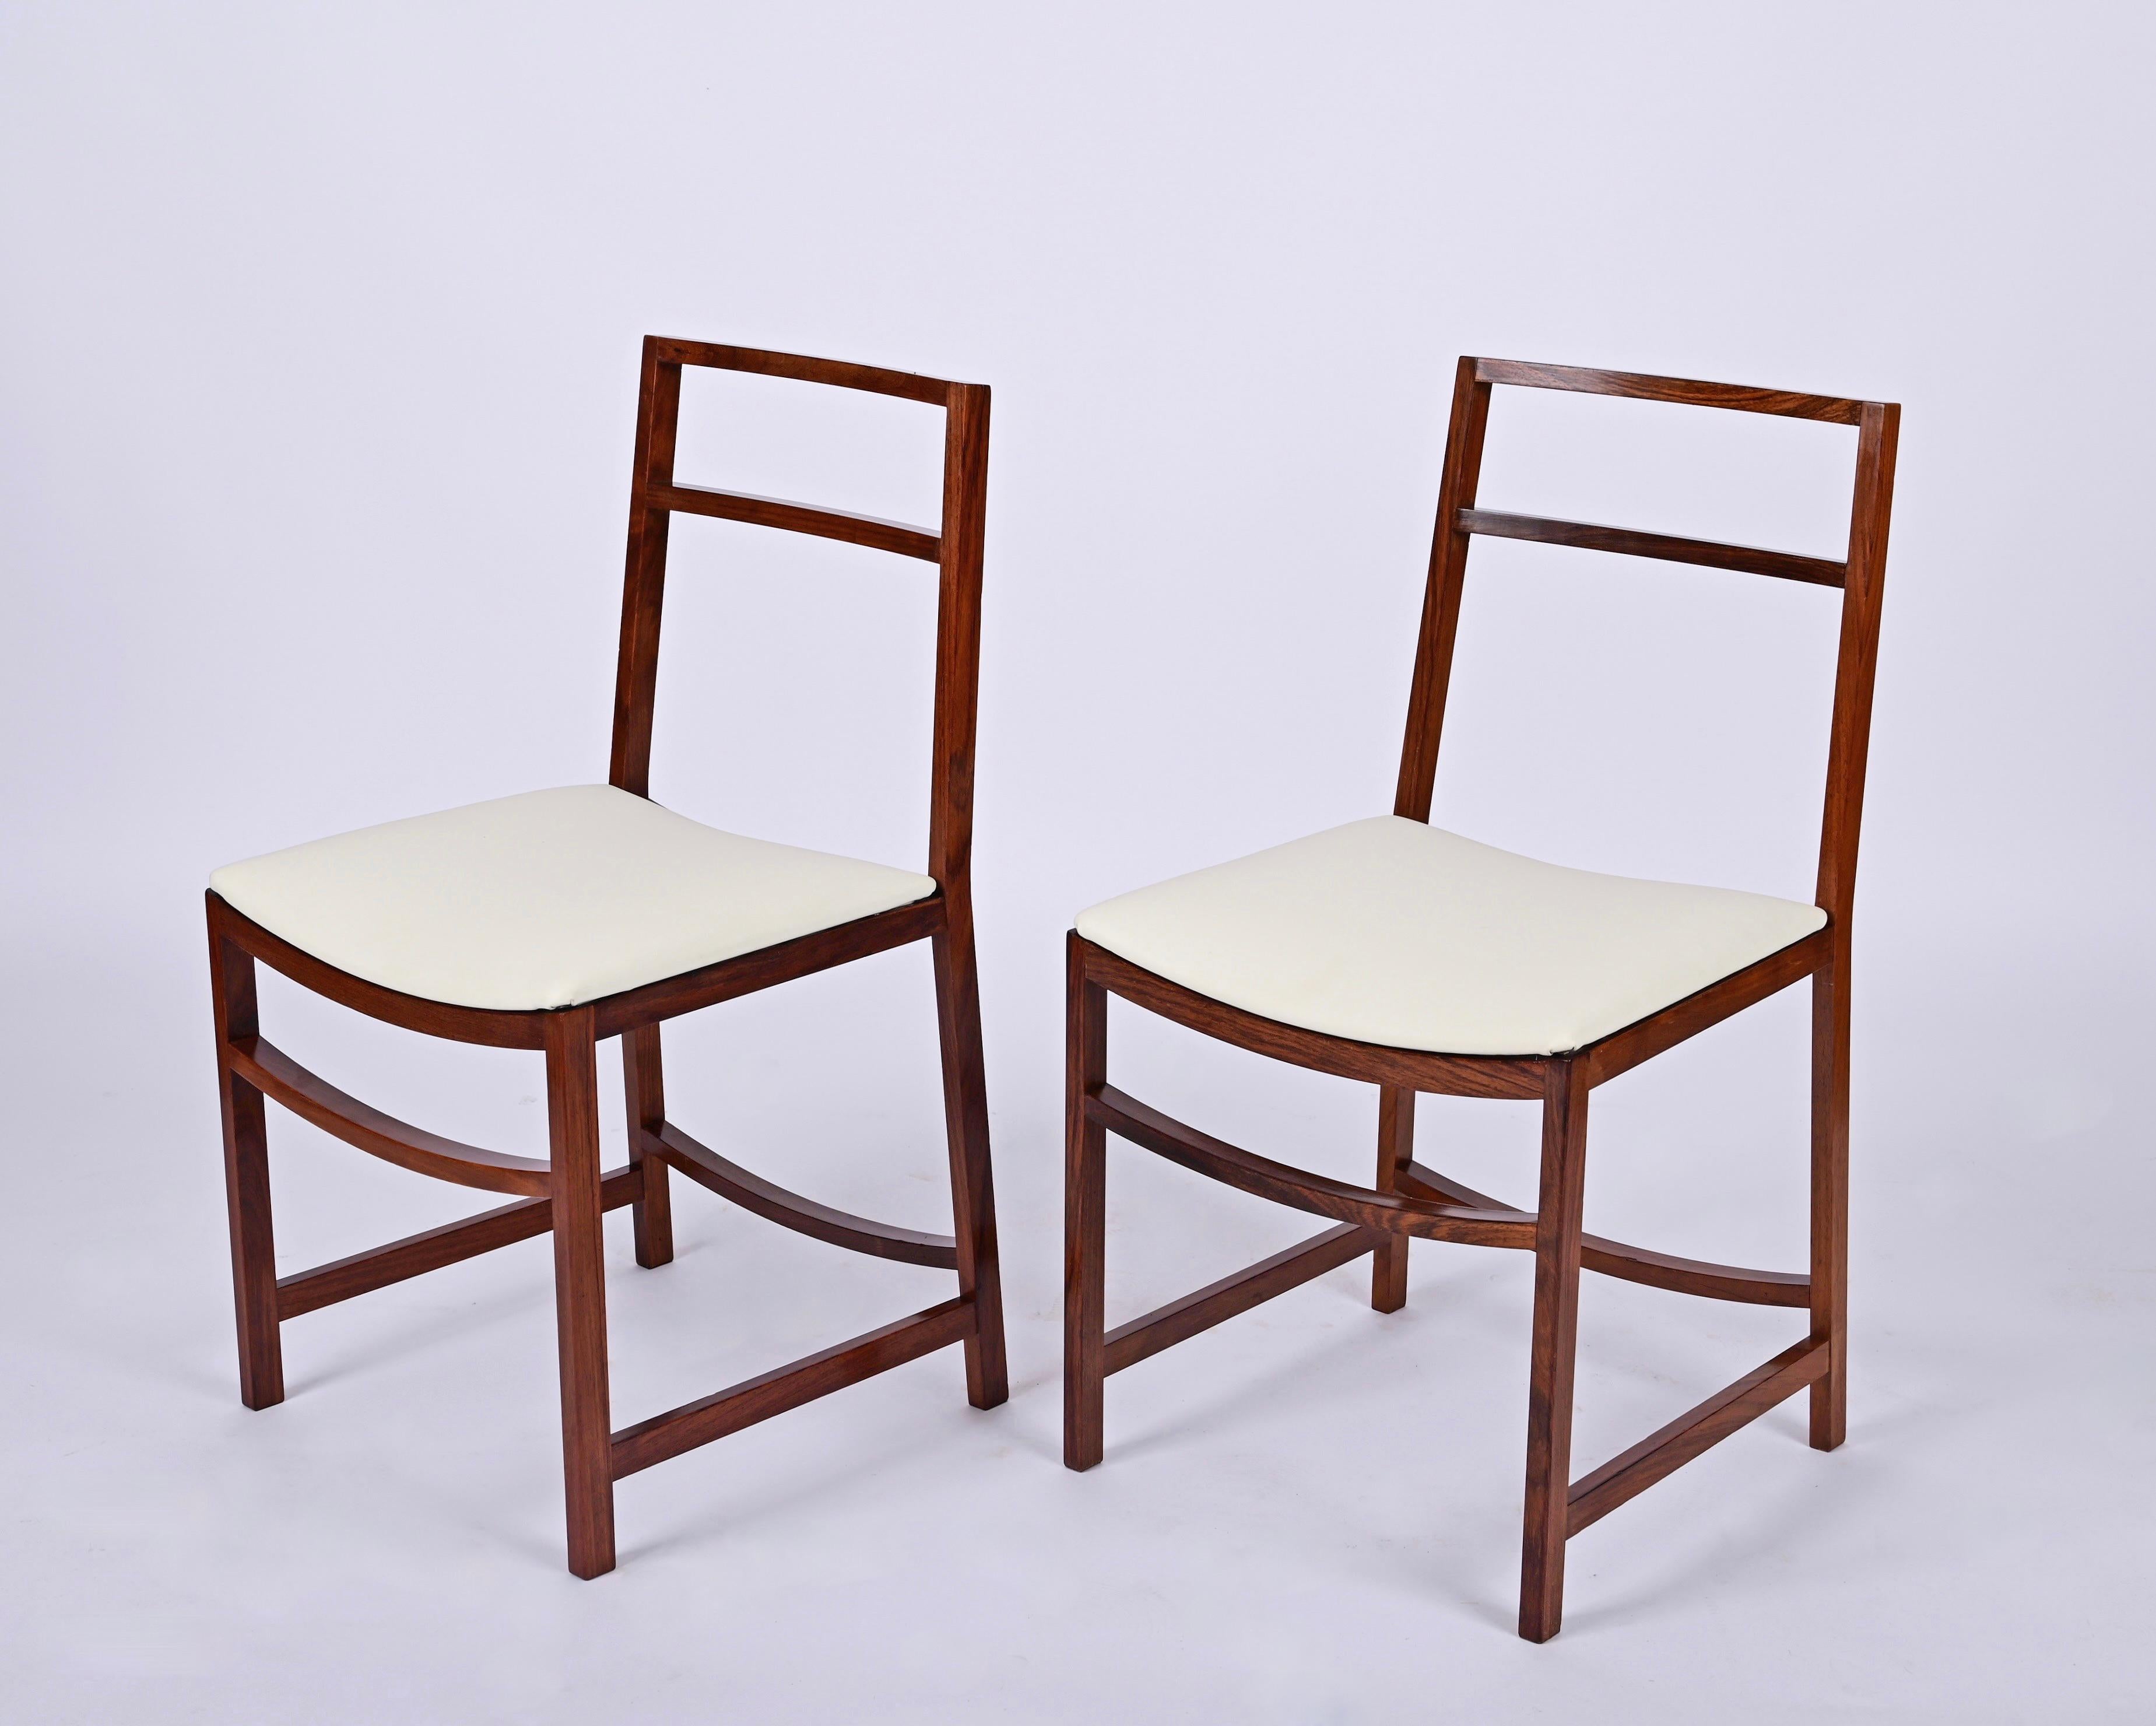 Gorgeous set of 8 midcentury chairs designed by Renato Venturi for MIM Roma during the 1960s in Italy.

These iconic chairs have a solid wood structure and beautifully new ivory-coloured faux leather seats. This set comes with the original MIM Roma